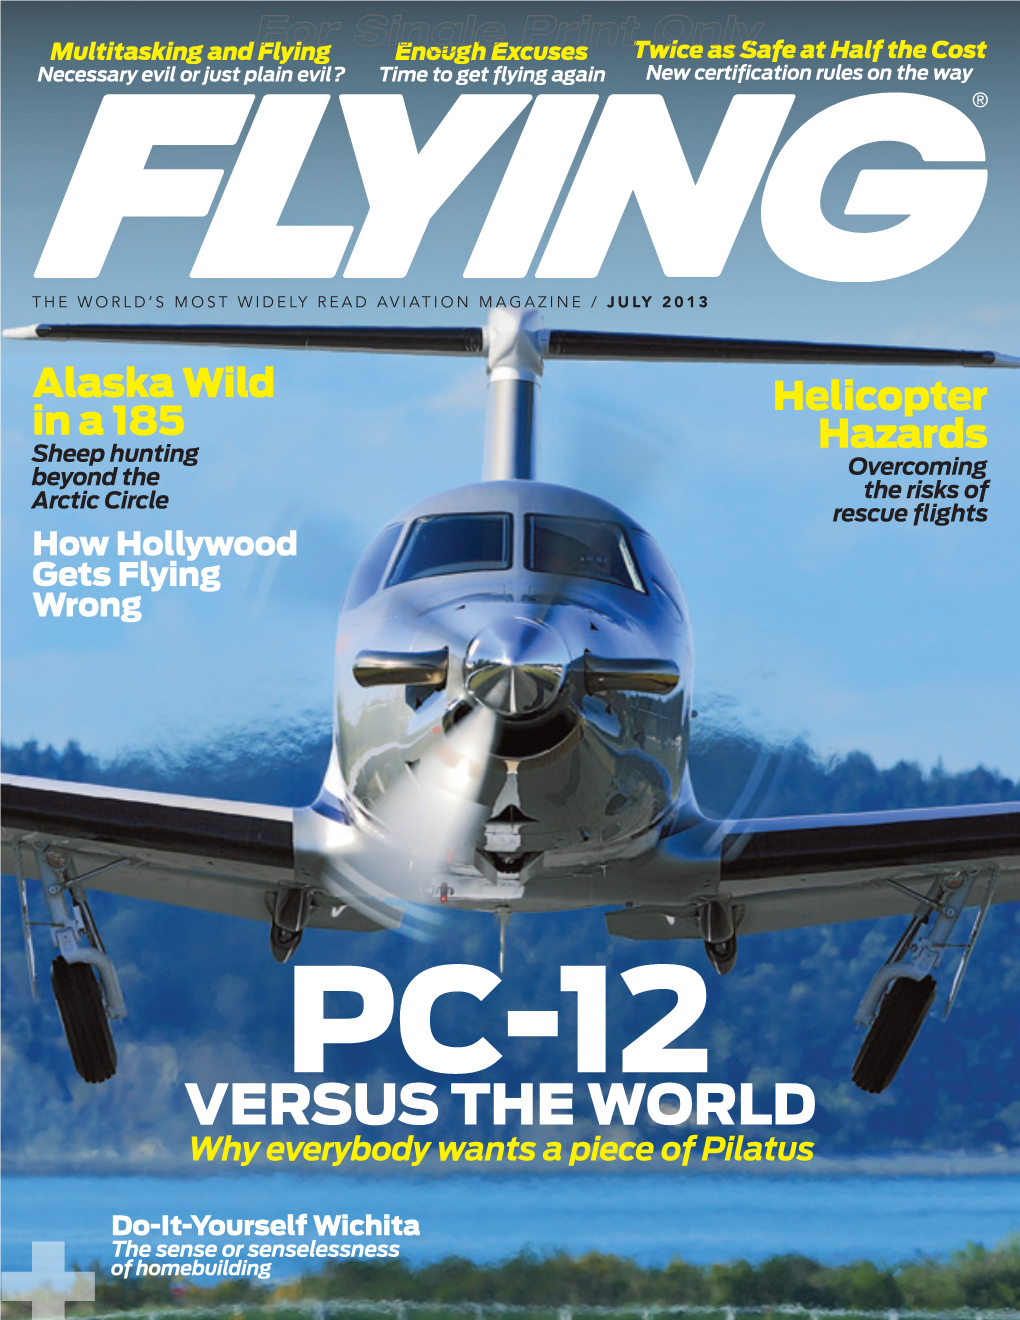 PC-12 VERSUS the WORLD Why Everybody Wants a Piece of Pilatus